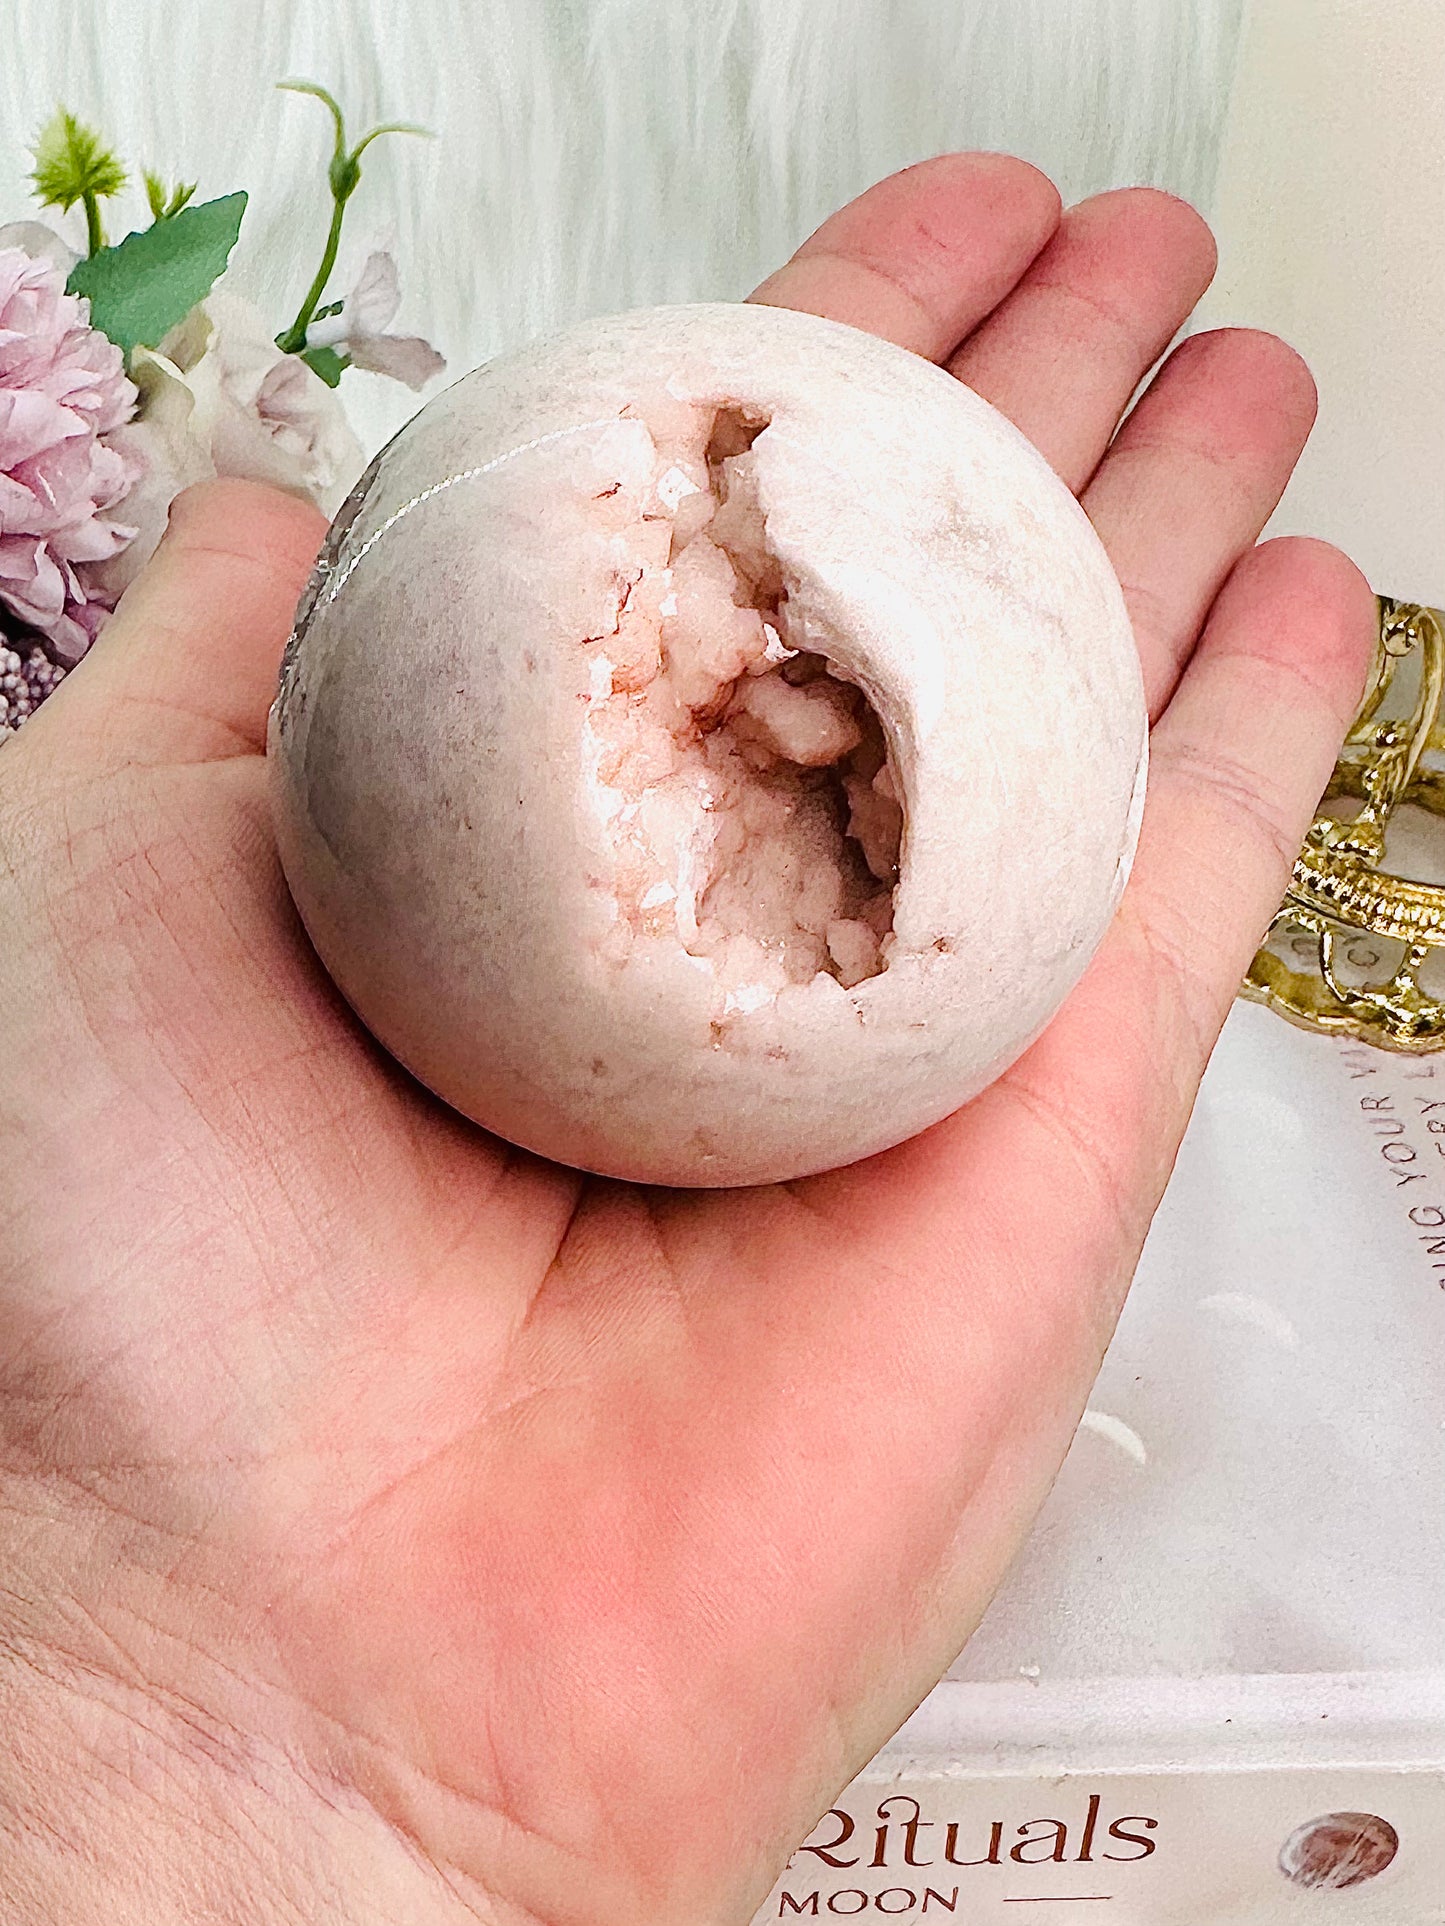 Spectacular & Unique Stunning Druzy Pink Amethyst Sphere From Brazil (5cm) A Gorgeous Magical Piece On Silver Stand (stand in pic is display only)